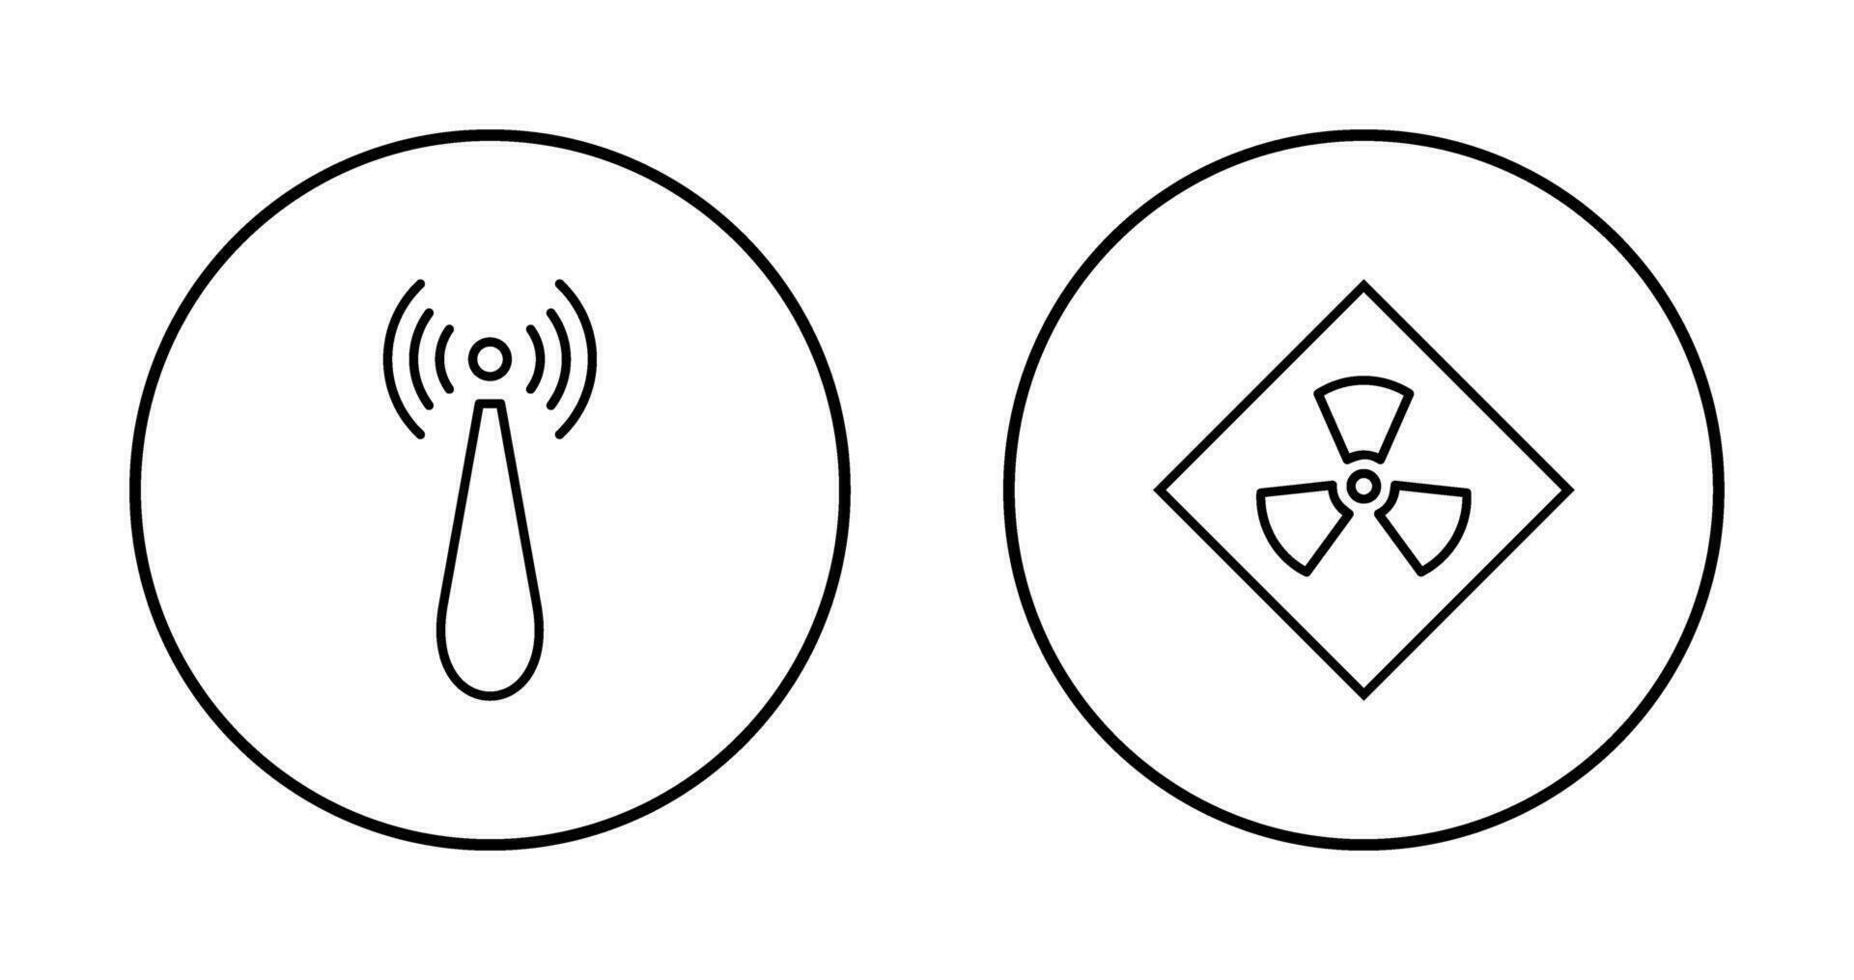 non ionizing radiation and radiation Icon vector